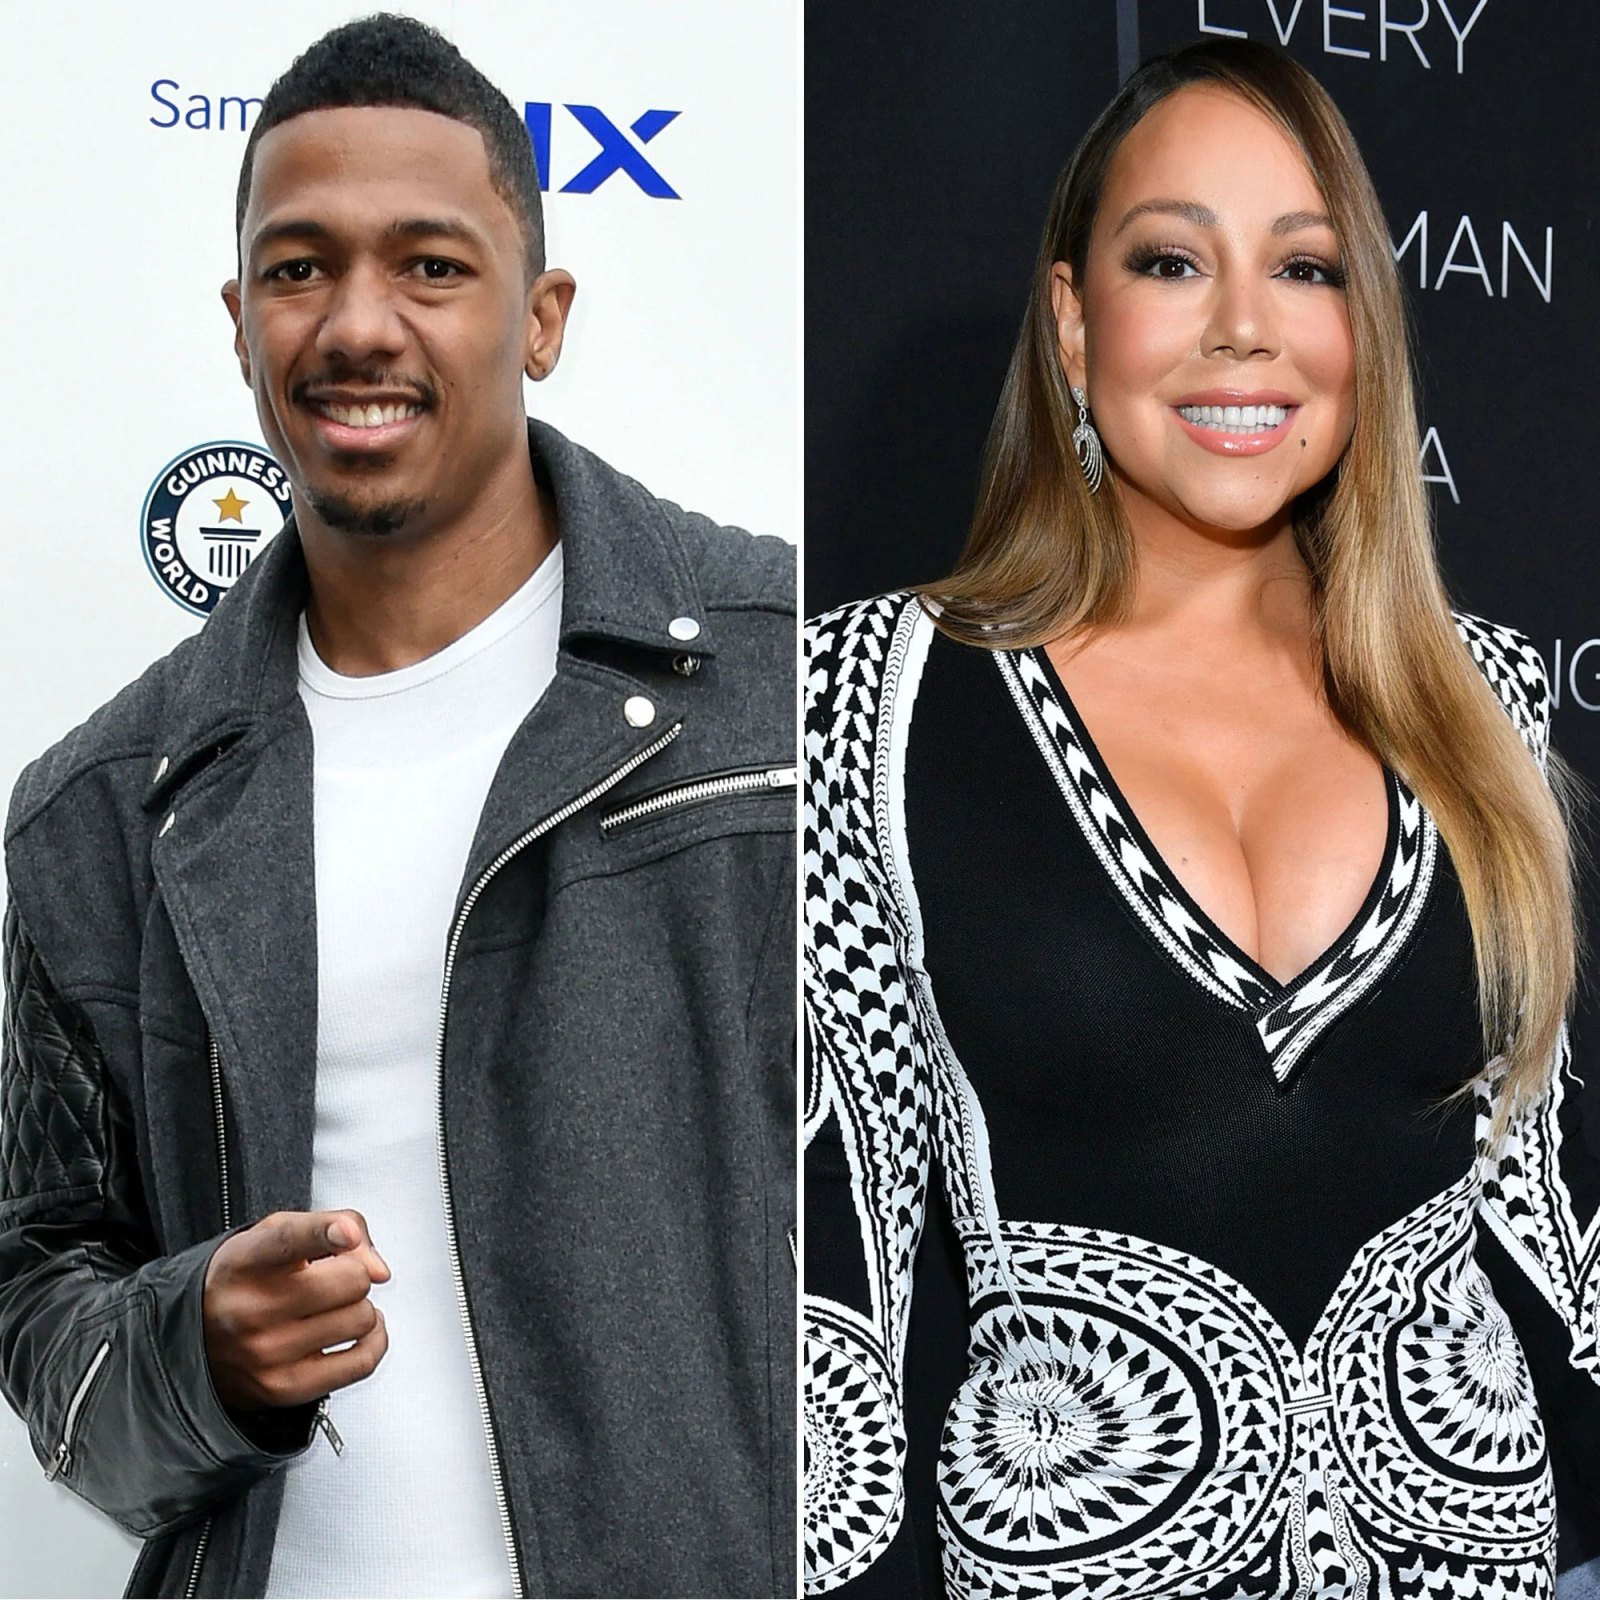 Mariah Carey and Nick Cannon’s Coparenting Moments Over the Years